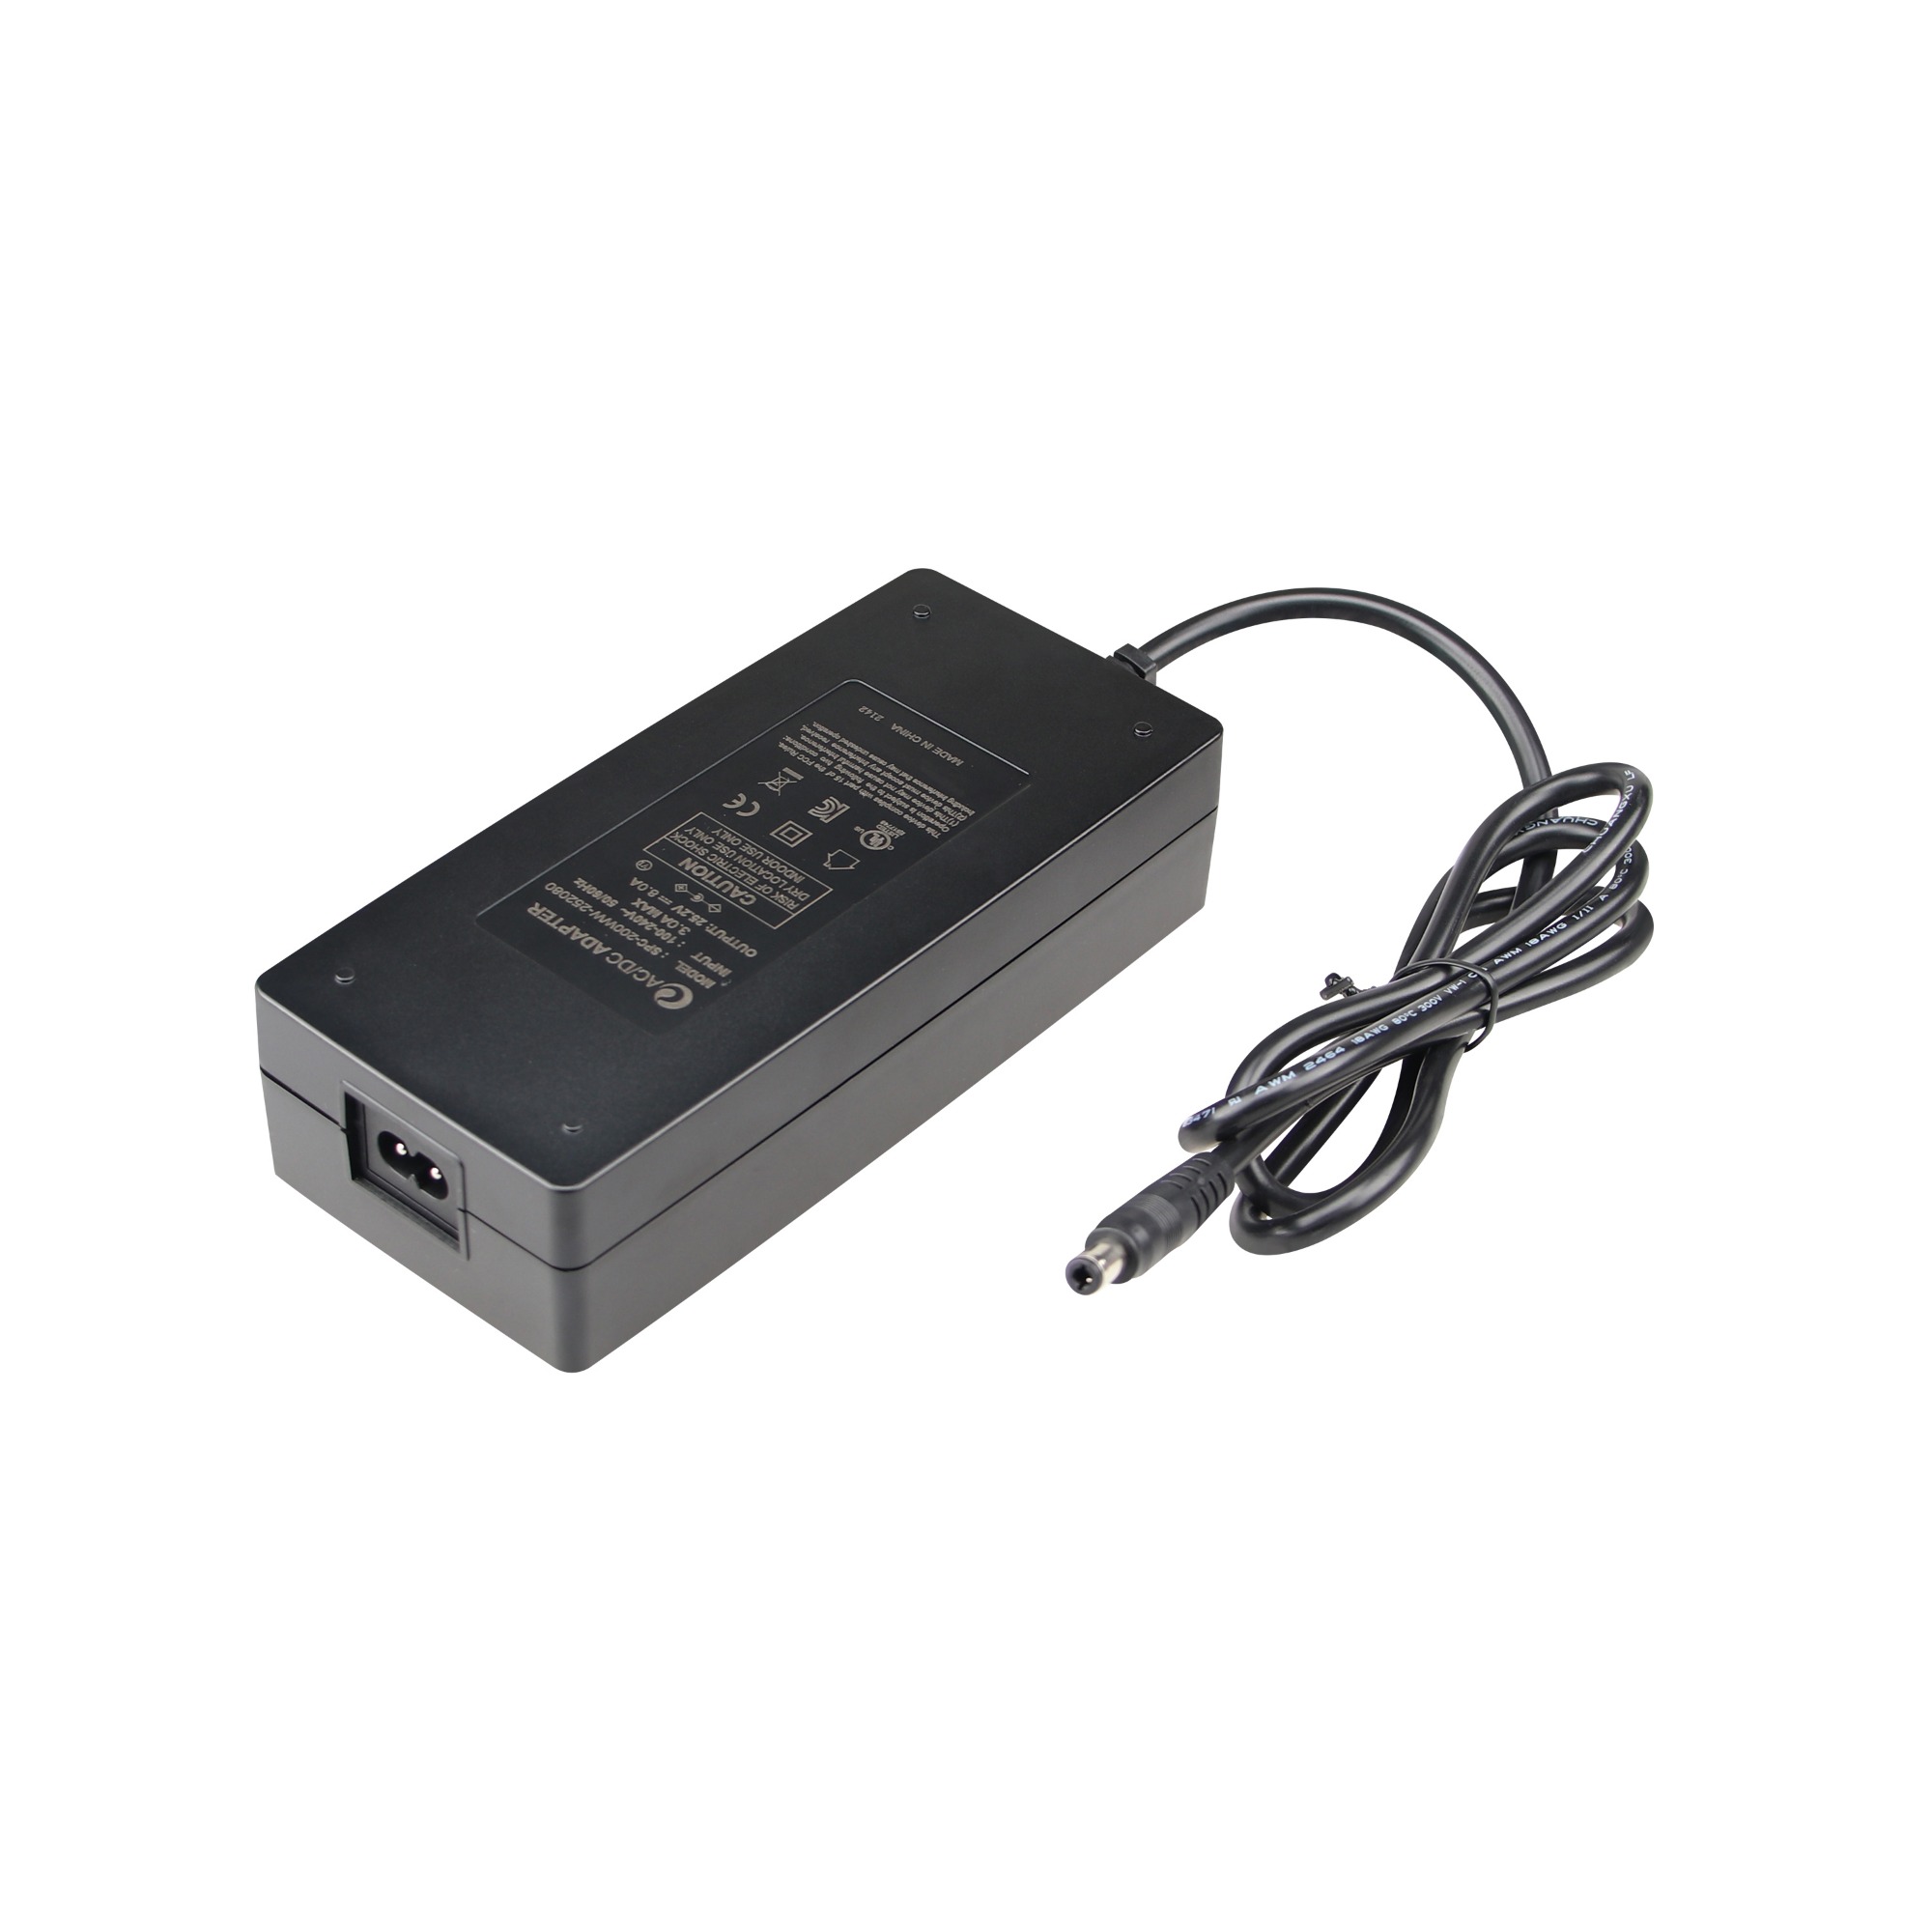 Smart charger 54.6V 3A Lithium battery charger For 48V 13S Li-ion Battery charger Electric Scooter E-bike motorcycle